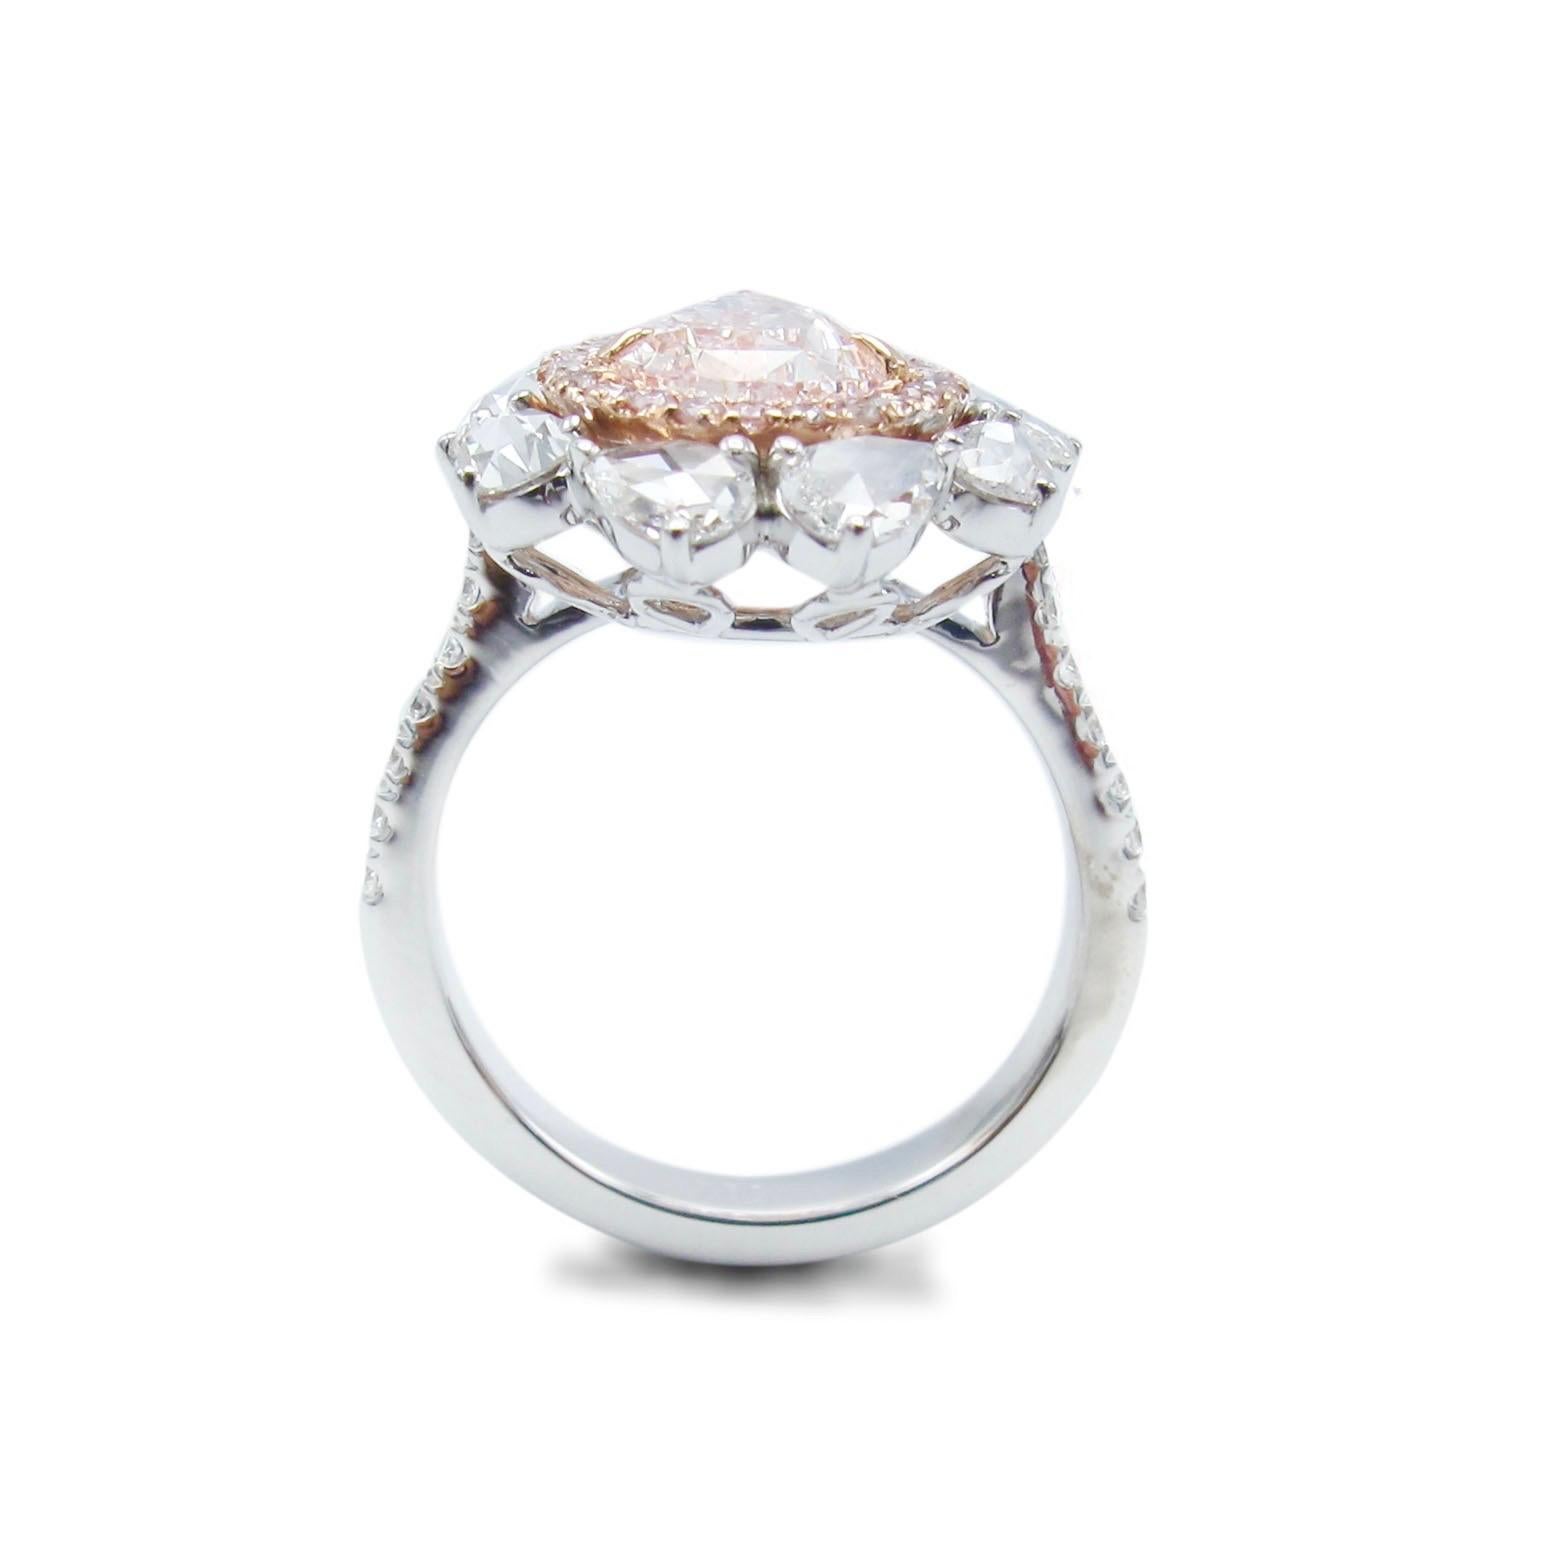  From The Museum Vault at Emilio Jewelry Located on New York's iconic Fifth Avenue,
Showcasing a very special and rare Gia certified natural fancy light pink diamond center with no overtone and is pure pink.  
We specialize in creating special